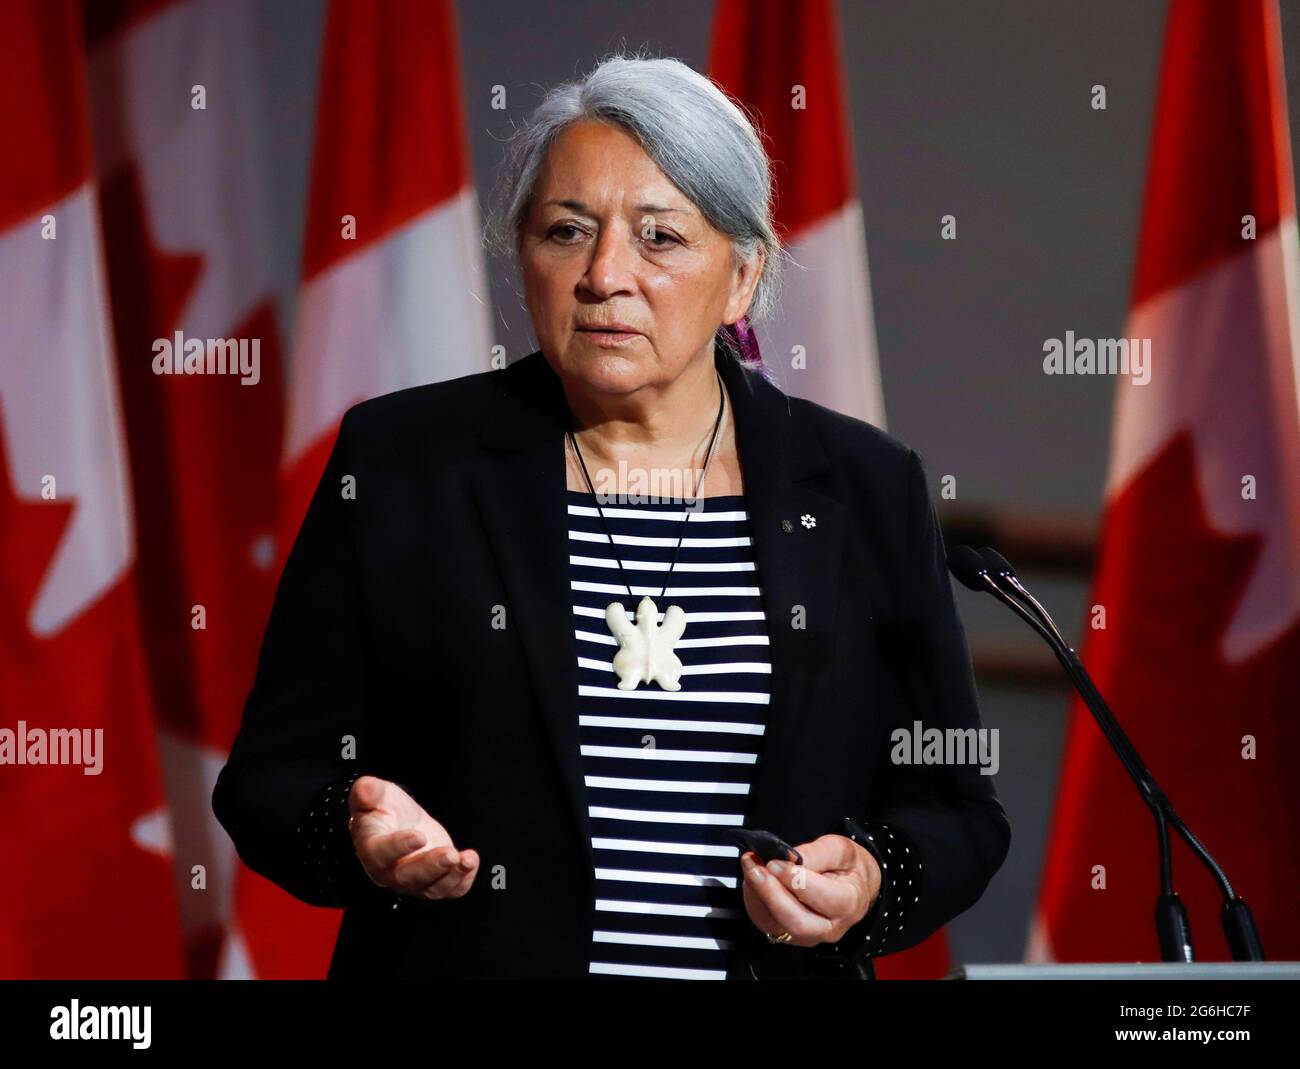 Mary Simon attends a news conference where she is announced as the next Governor General of Canada in Gatineau, Quebec, Canada July 6, 2021.  REUTERS/Patrick Doyle Stock Photo